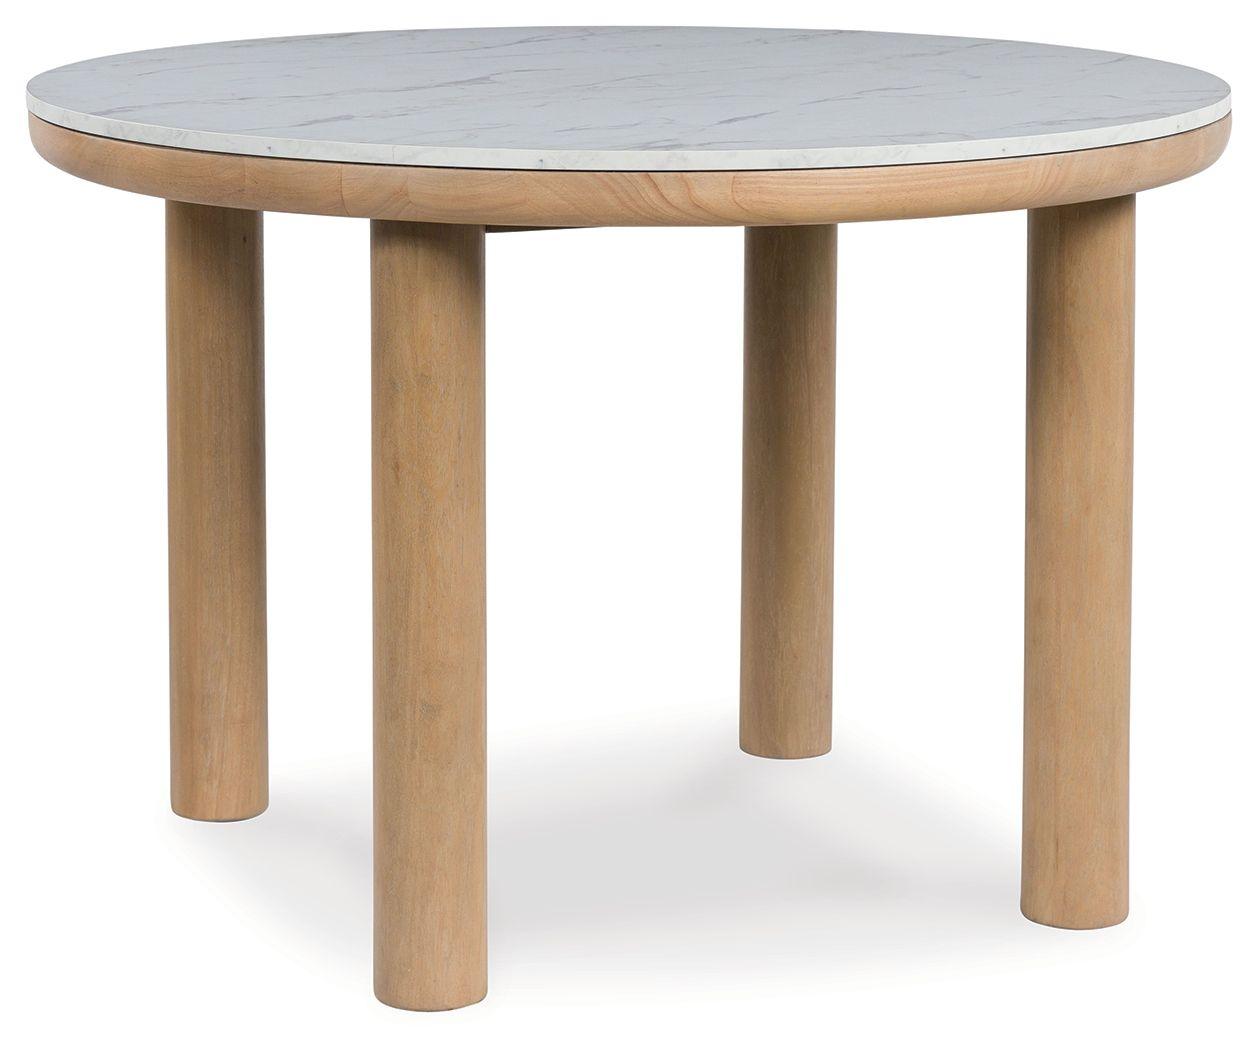 Signature Design by Ashley® - Sawdyn - Light Brown - Round Dining Room Table - 5th Avenue Furniture